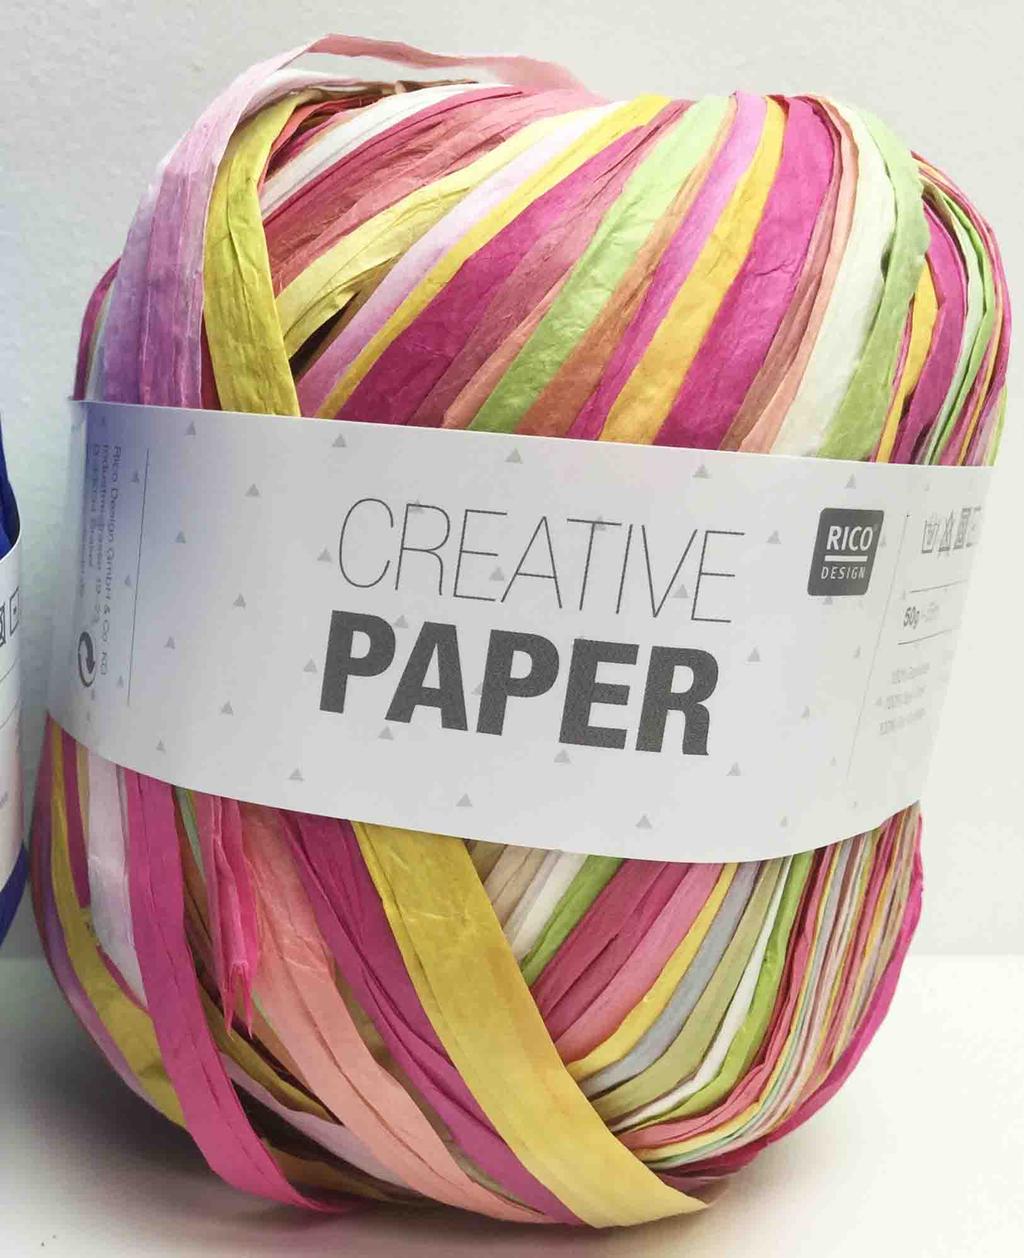 Paper Yarn Source: Paper (cellulose) Construction: Wood pulp that is pressed into sheets & dried Properties: Washable, strong when knitted, colour fast, lightweight Other